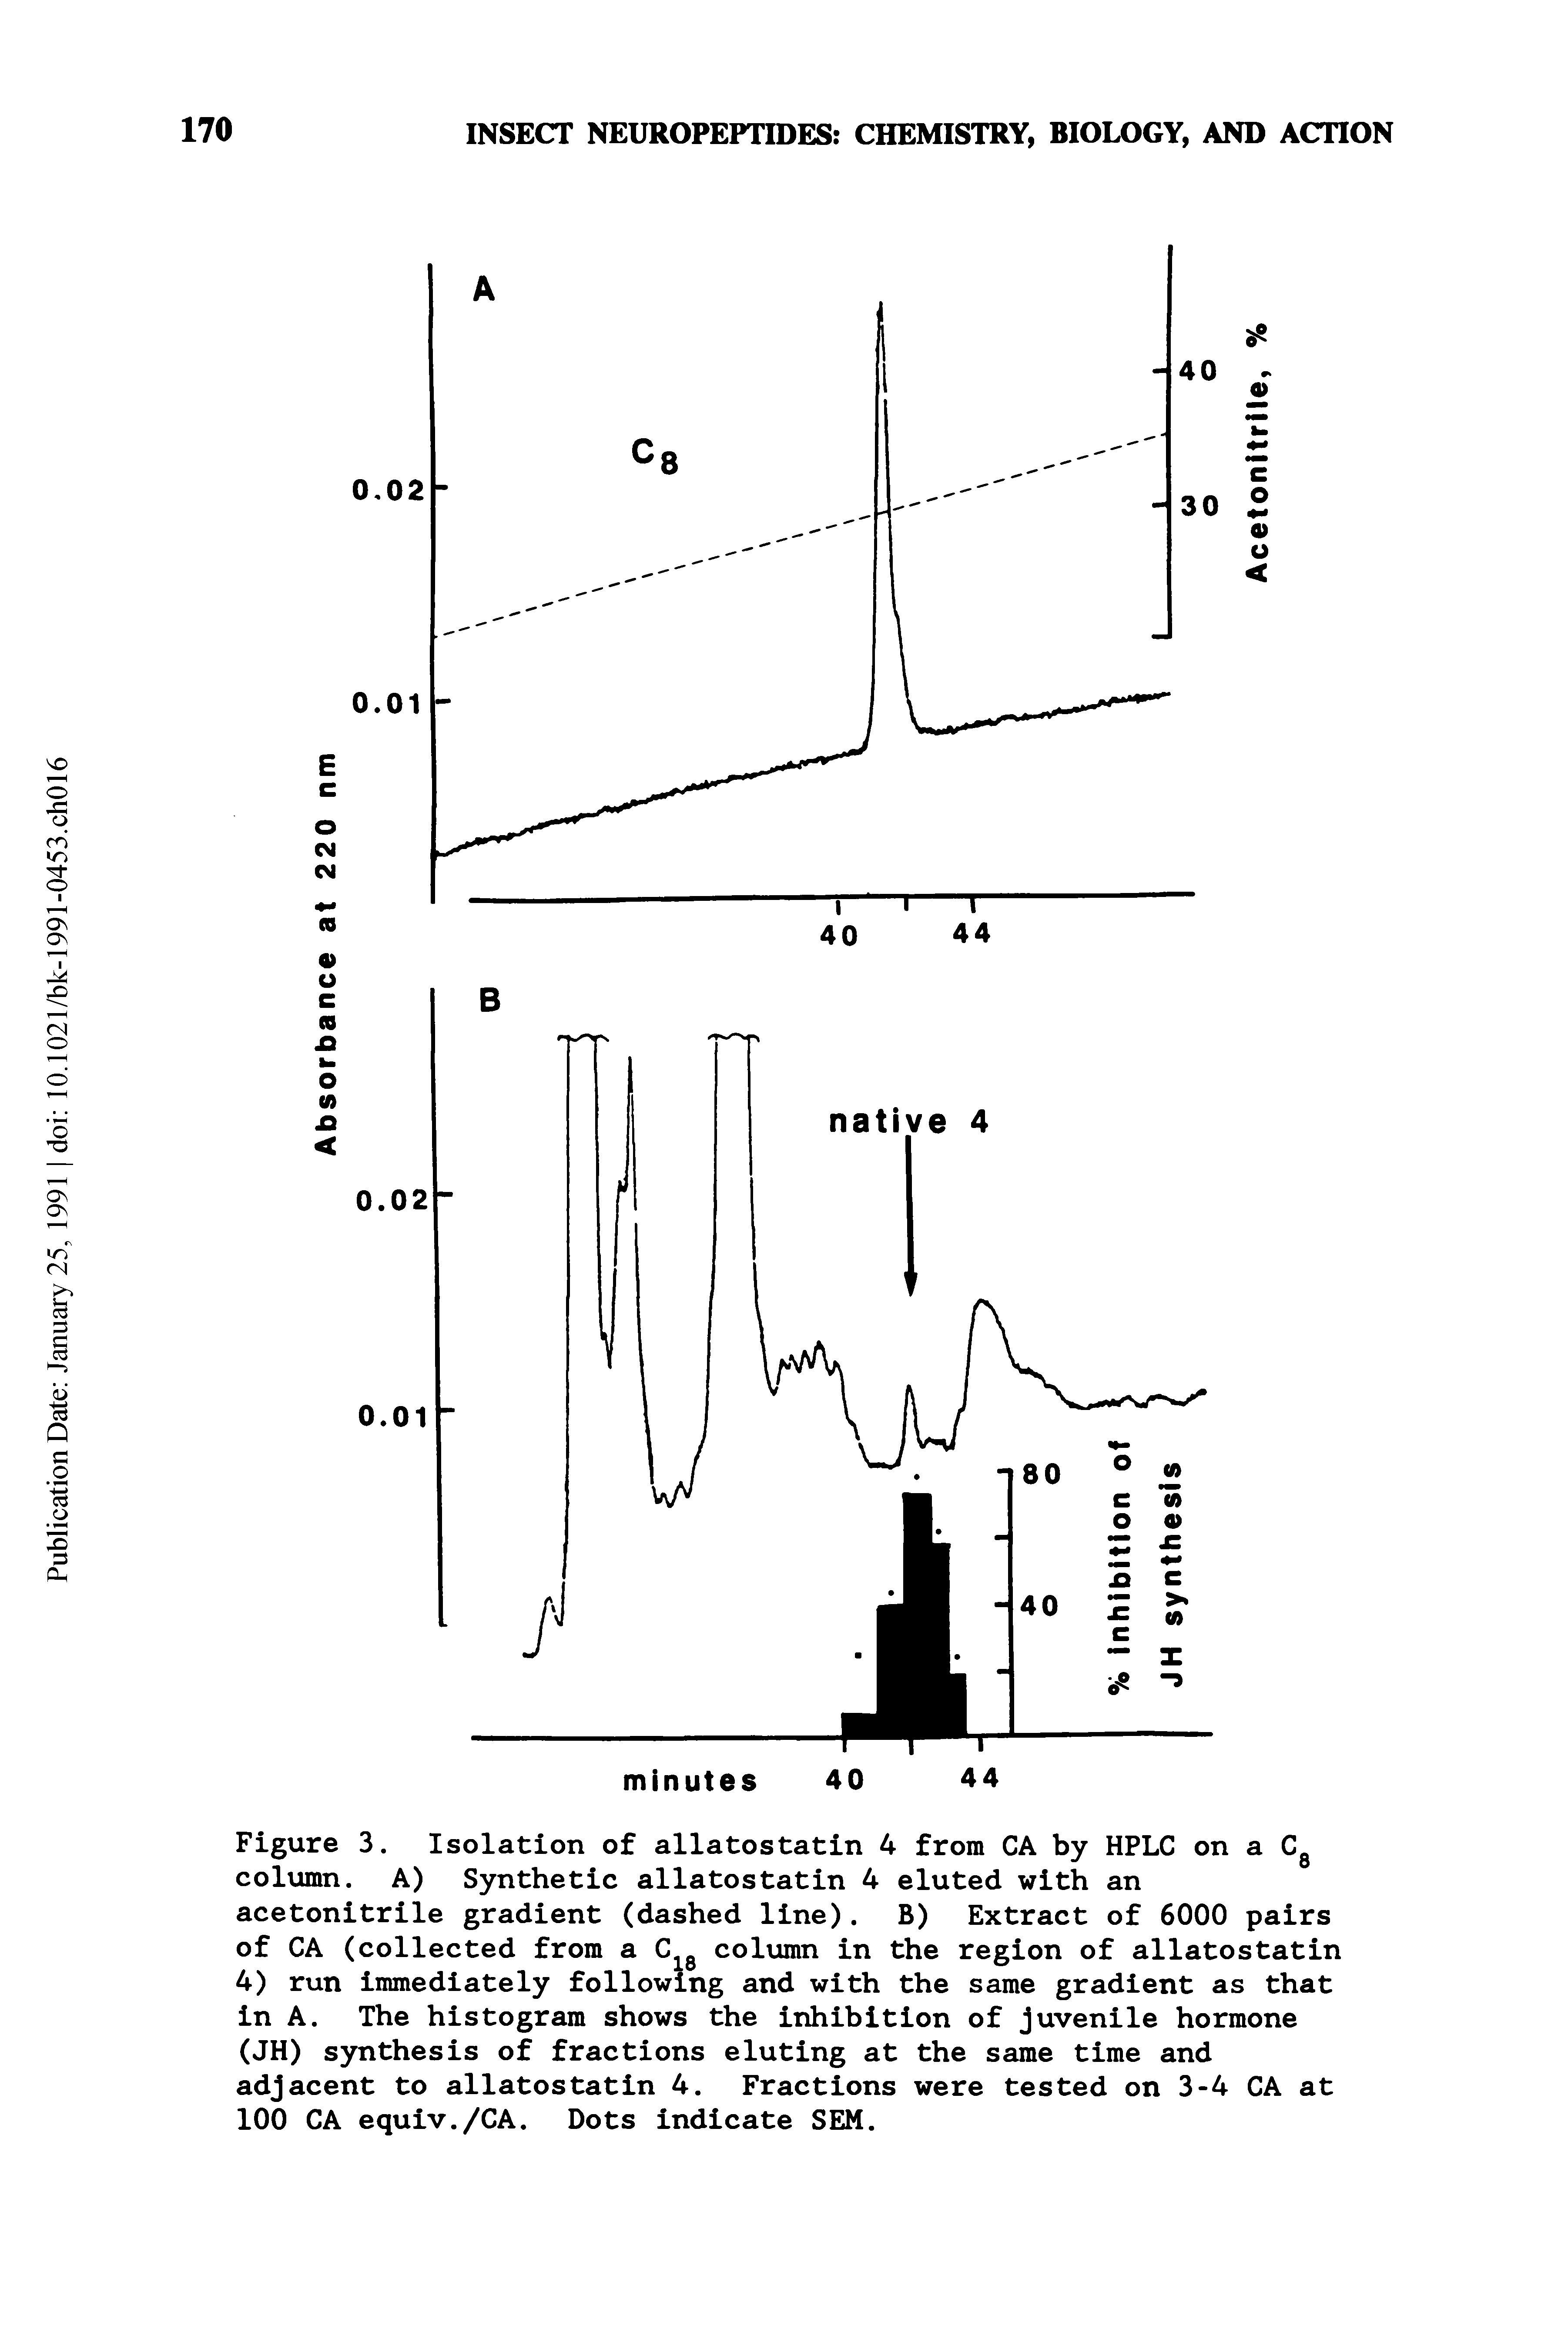 Figure 3. Isolation of allatostatin 4 from CA by HPLC on a Cg column. A) Synthetic allatostatin 4 eluted with an acetonitrile gradient (dashed line). B) Extract of 6000 pairs of CA (collected from a C column in the region of allatostatin 4) run immediately following and with the same gradient as that in A. The histogram shows the inhibition of juvenile hormone (JH) synthesis of fractions eluting at the same time and adjacent to allatostatin 4. Fractions were tested on 3-4 CA at 100 CA equiv./CA. Dots indicate SEM.